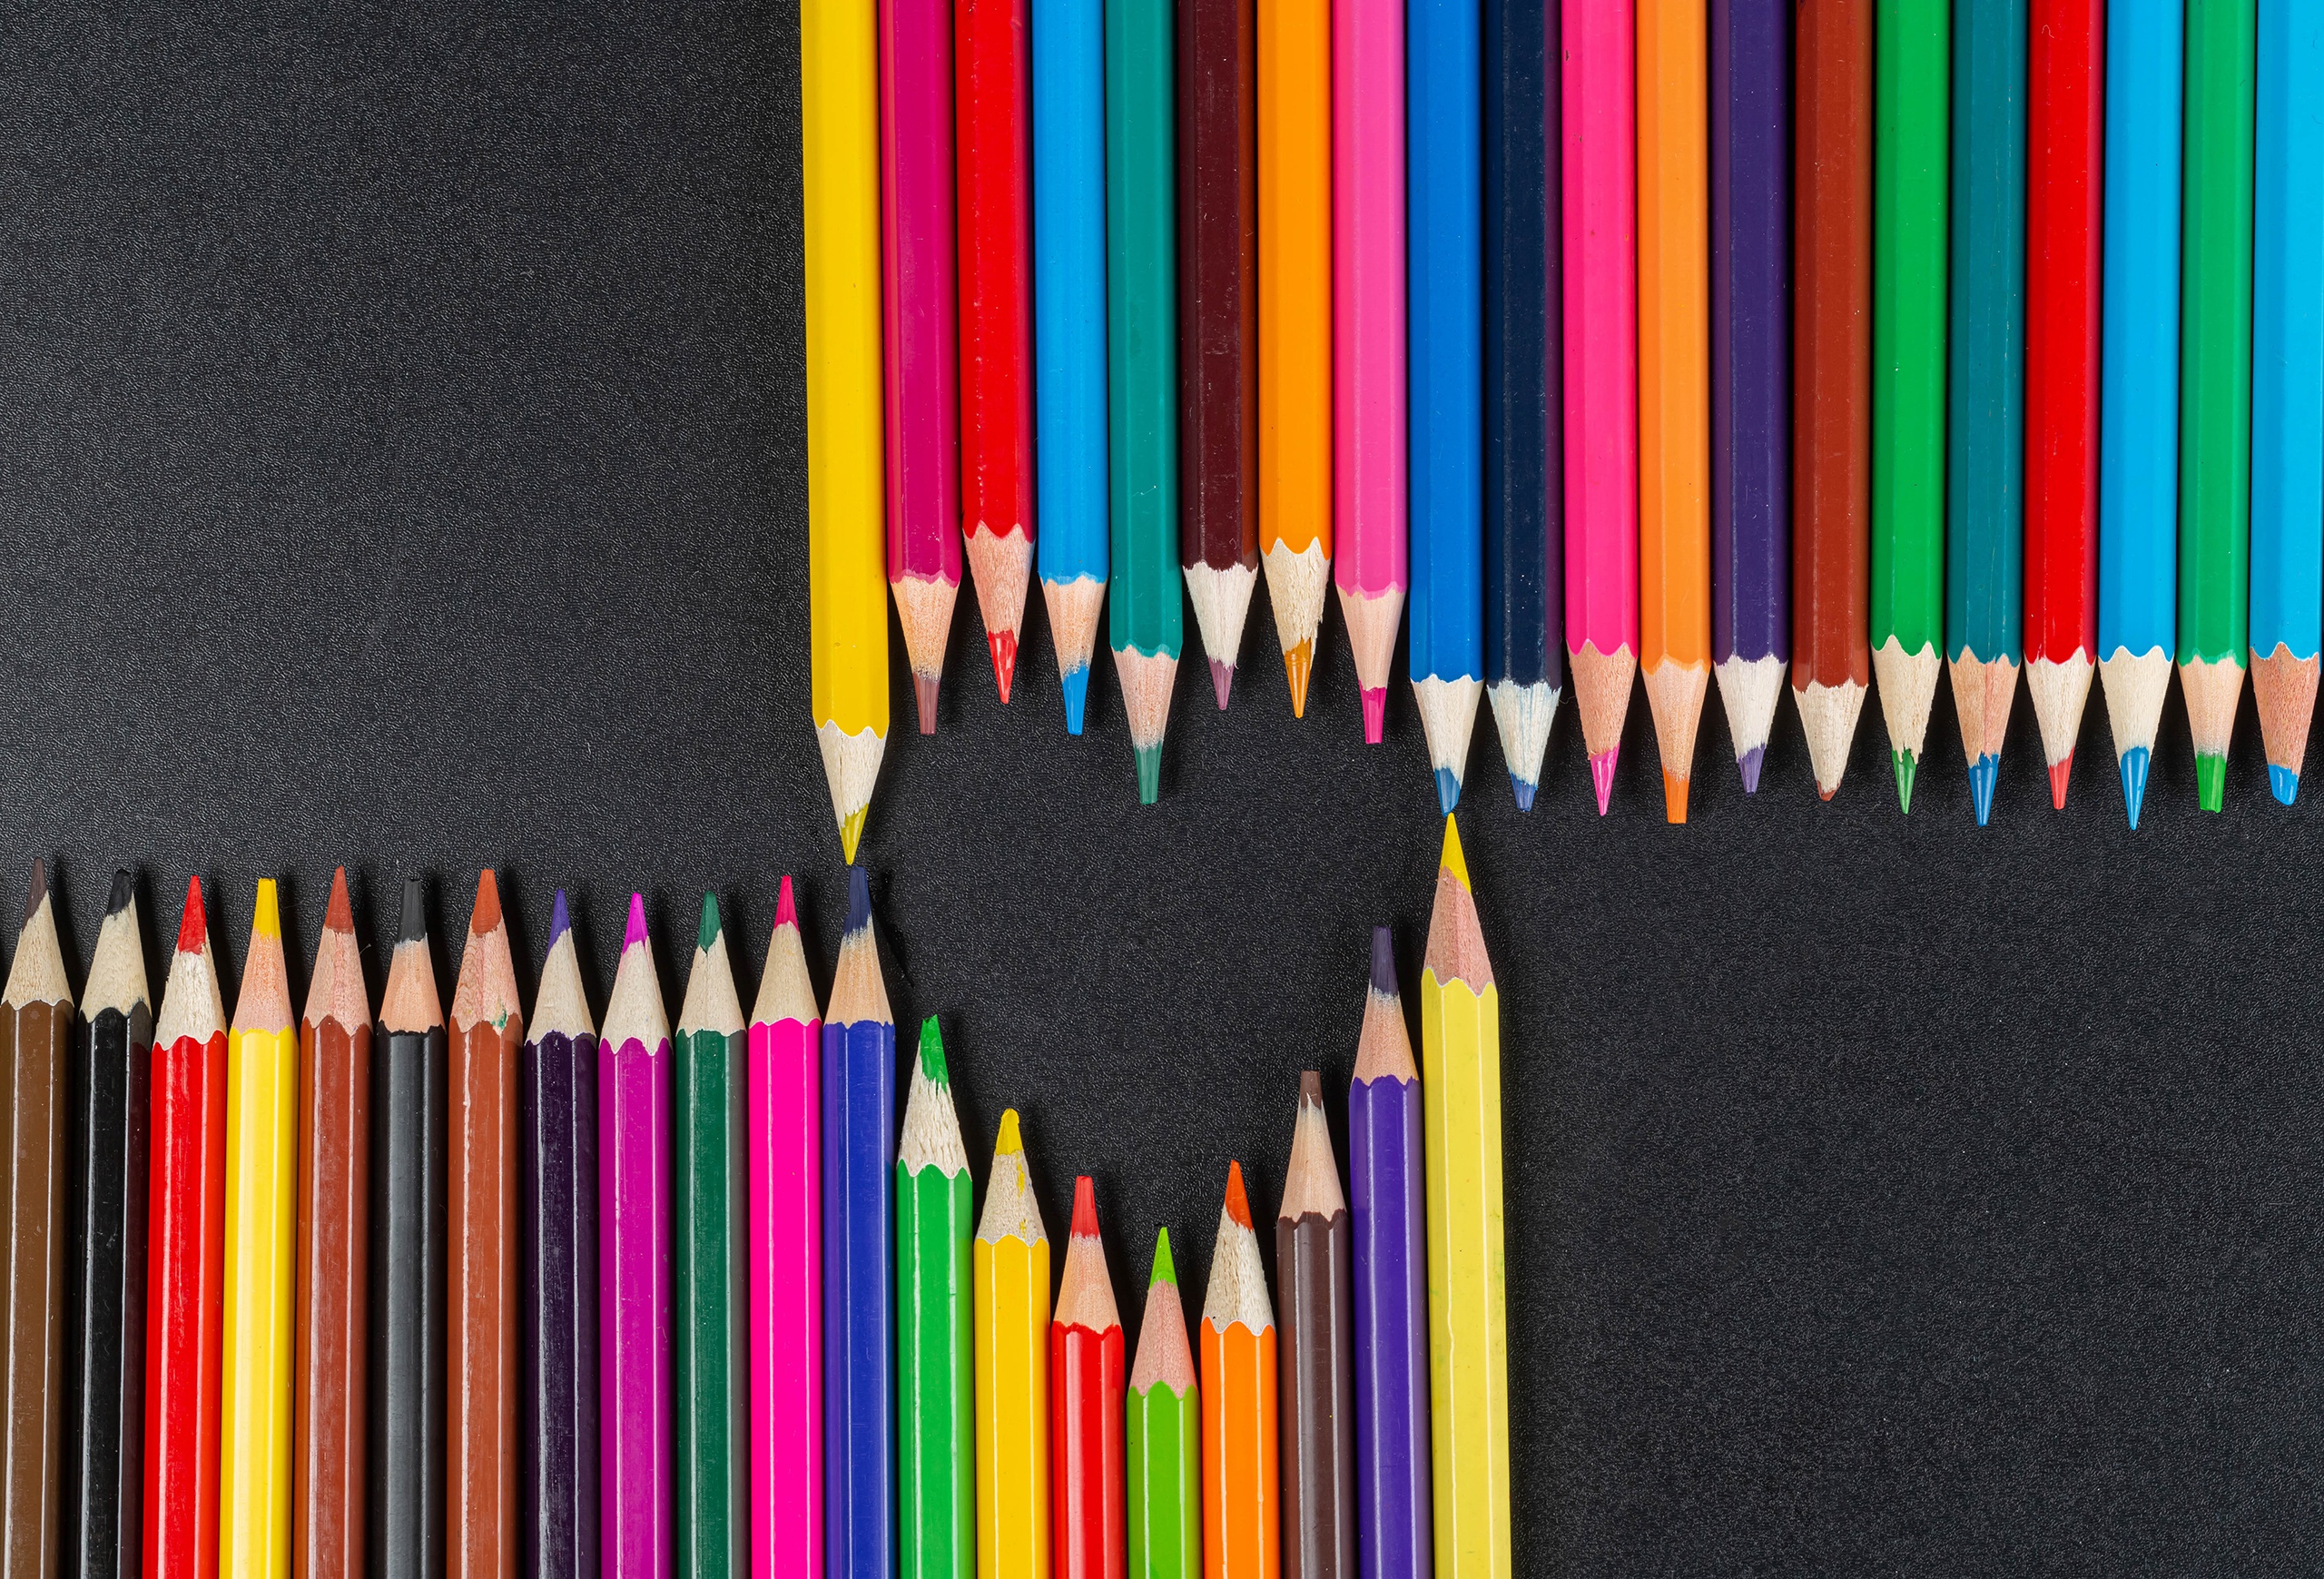 Colorful Heart Shaped Pencil 2560x1739